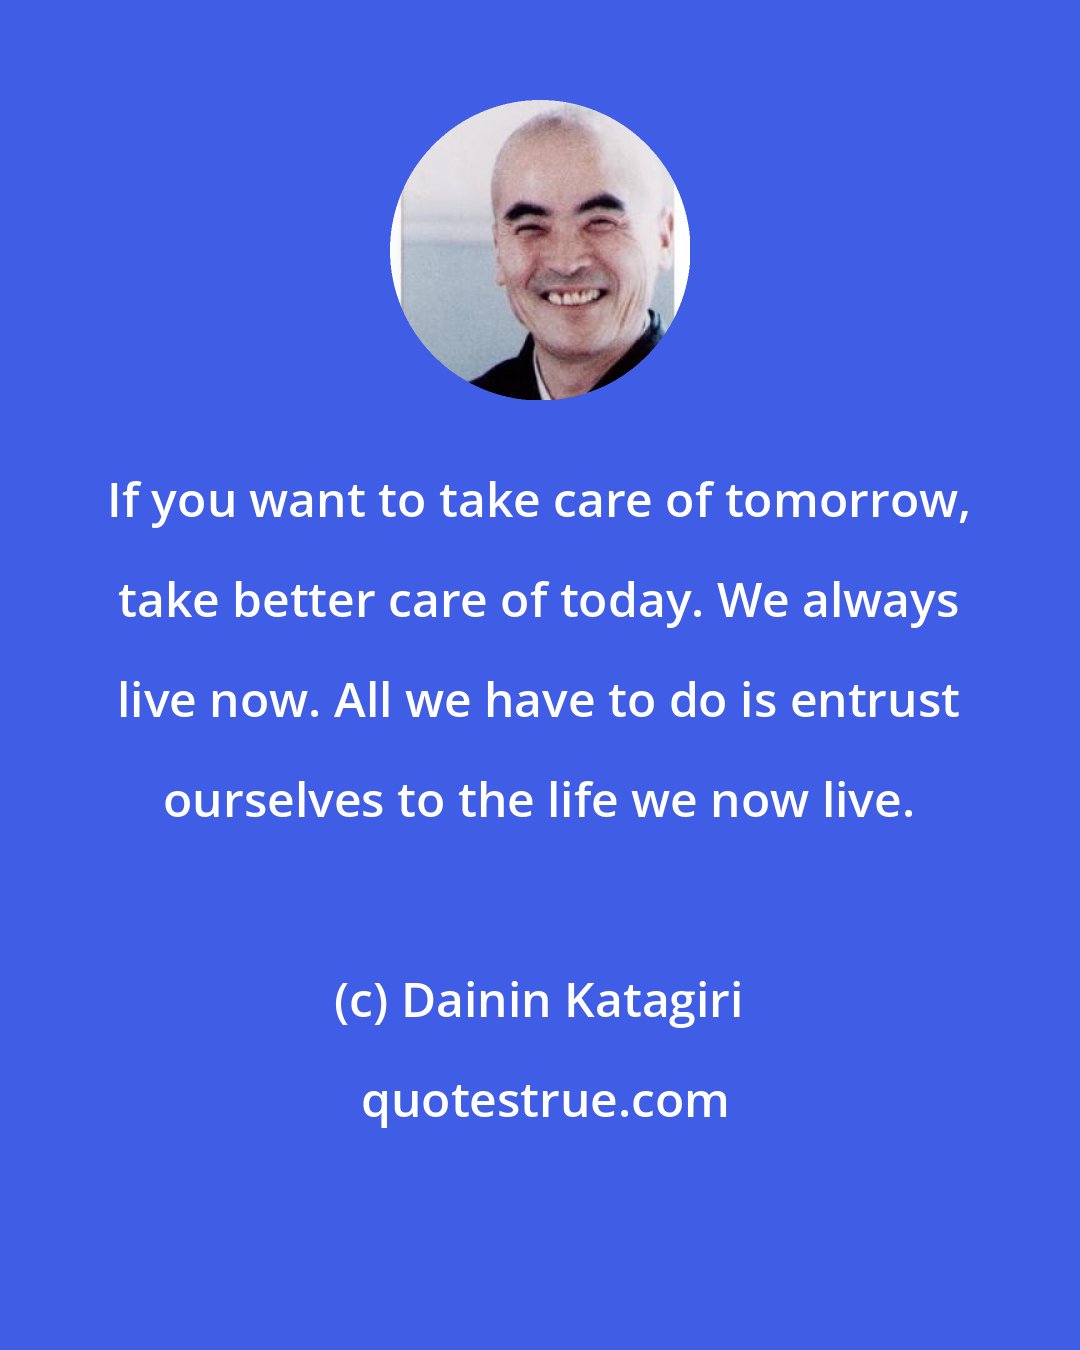 Dainin Katagiri: If you want to take care of tomorrow, take better care of today. We always live now. All we have to do is entrust ourselves to the life we now live.